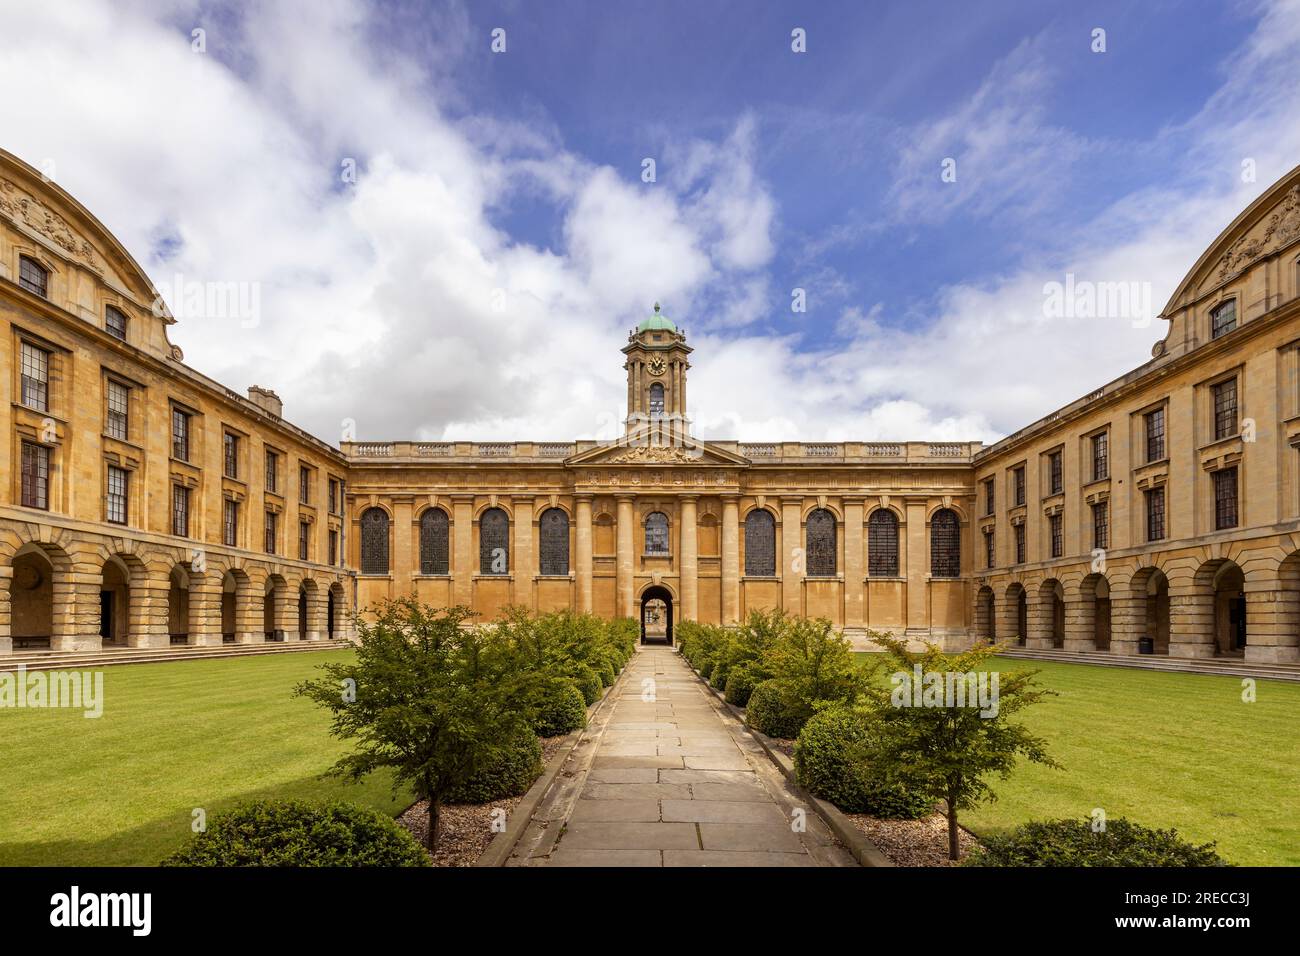 Queen's College, part of University of Oxford, Oxfordshire, England Stock Photo